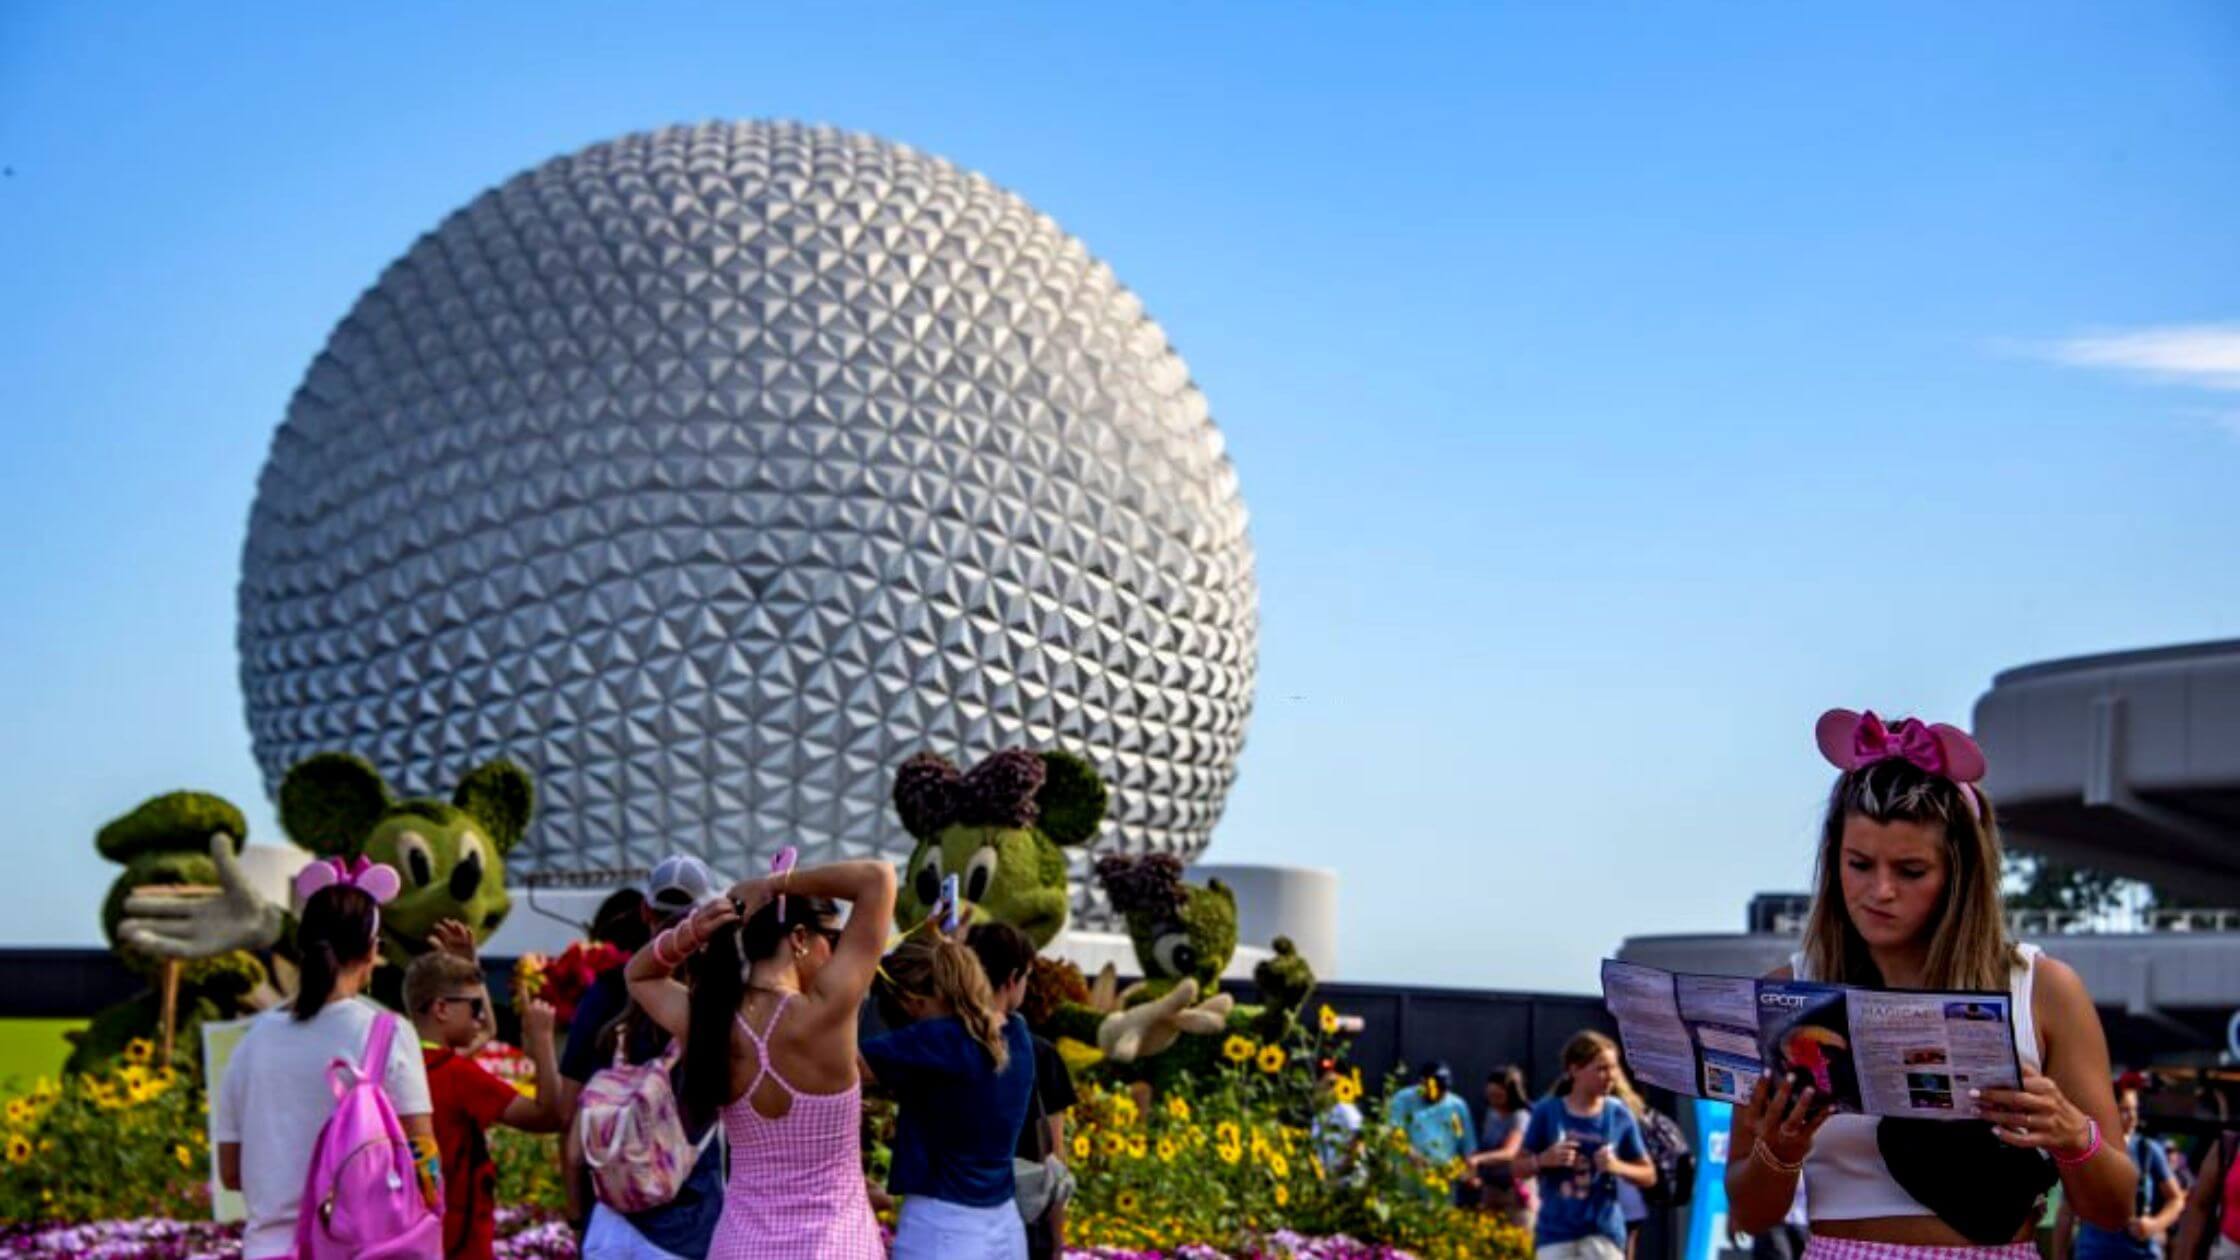 Drunk Man Arrested At Disney World After Drinking Beers And Stripping